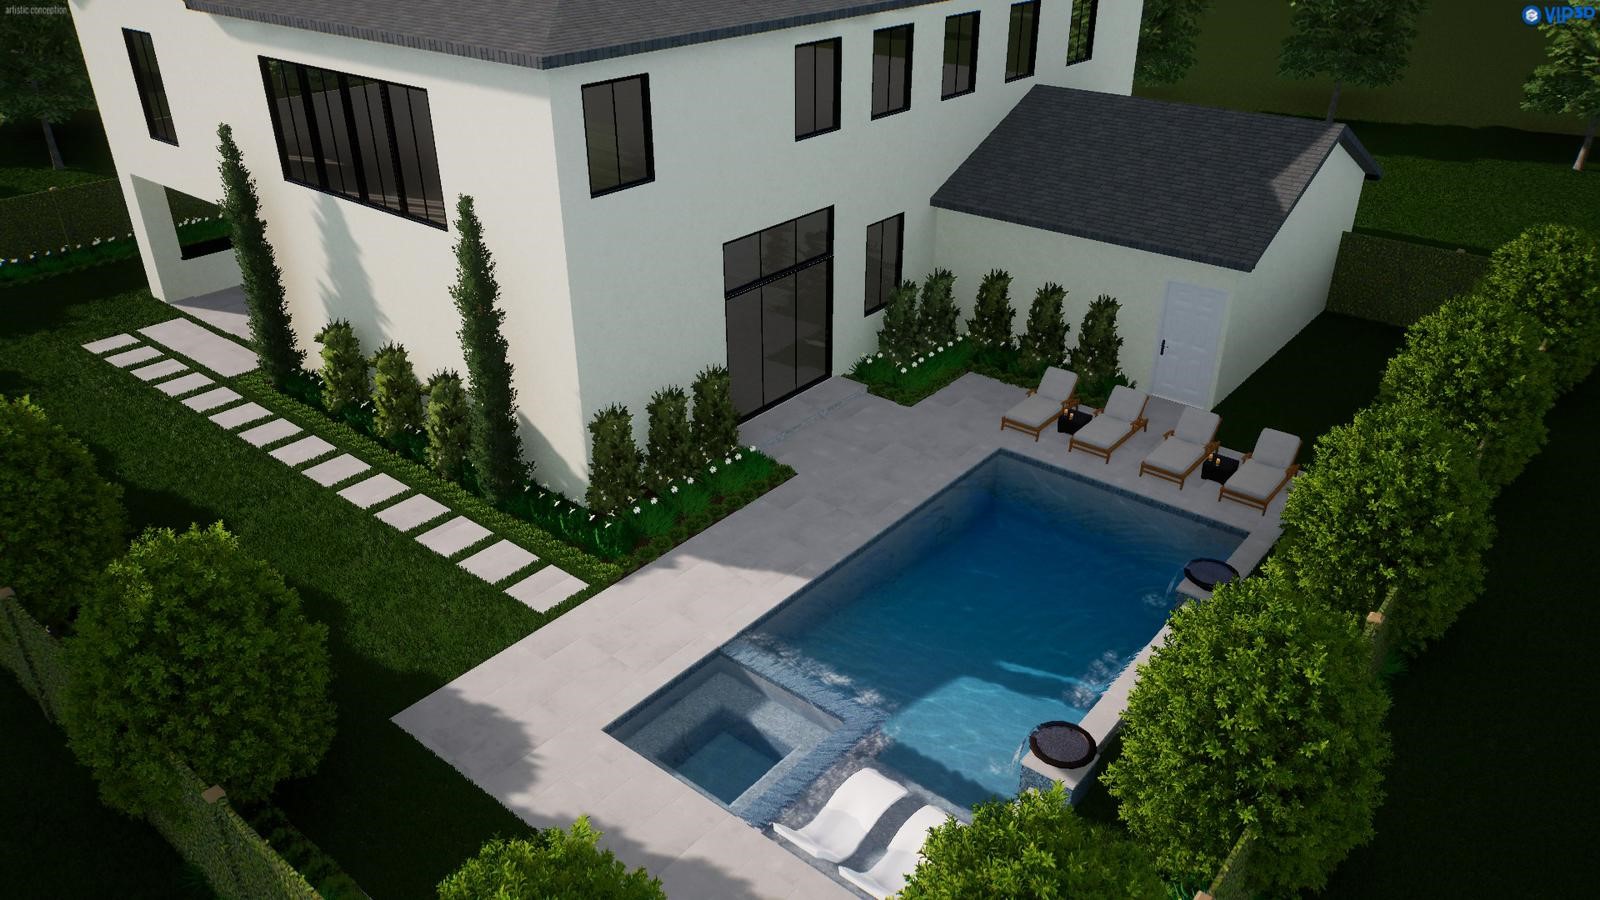 The wraparound backyard complete with a veranda and summer kitchen offers plenty of space for outdoor living and entertaining, with ample space to build a sizeable pool. Unbeatable central location & walkable to some of the city’s finest dining & shopping.

*Note, this image is a rendering